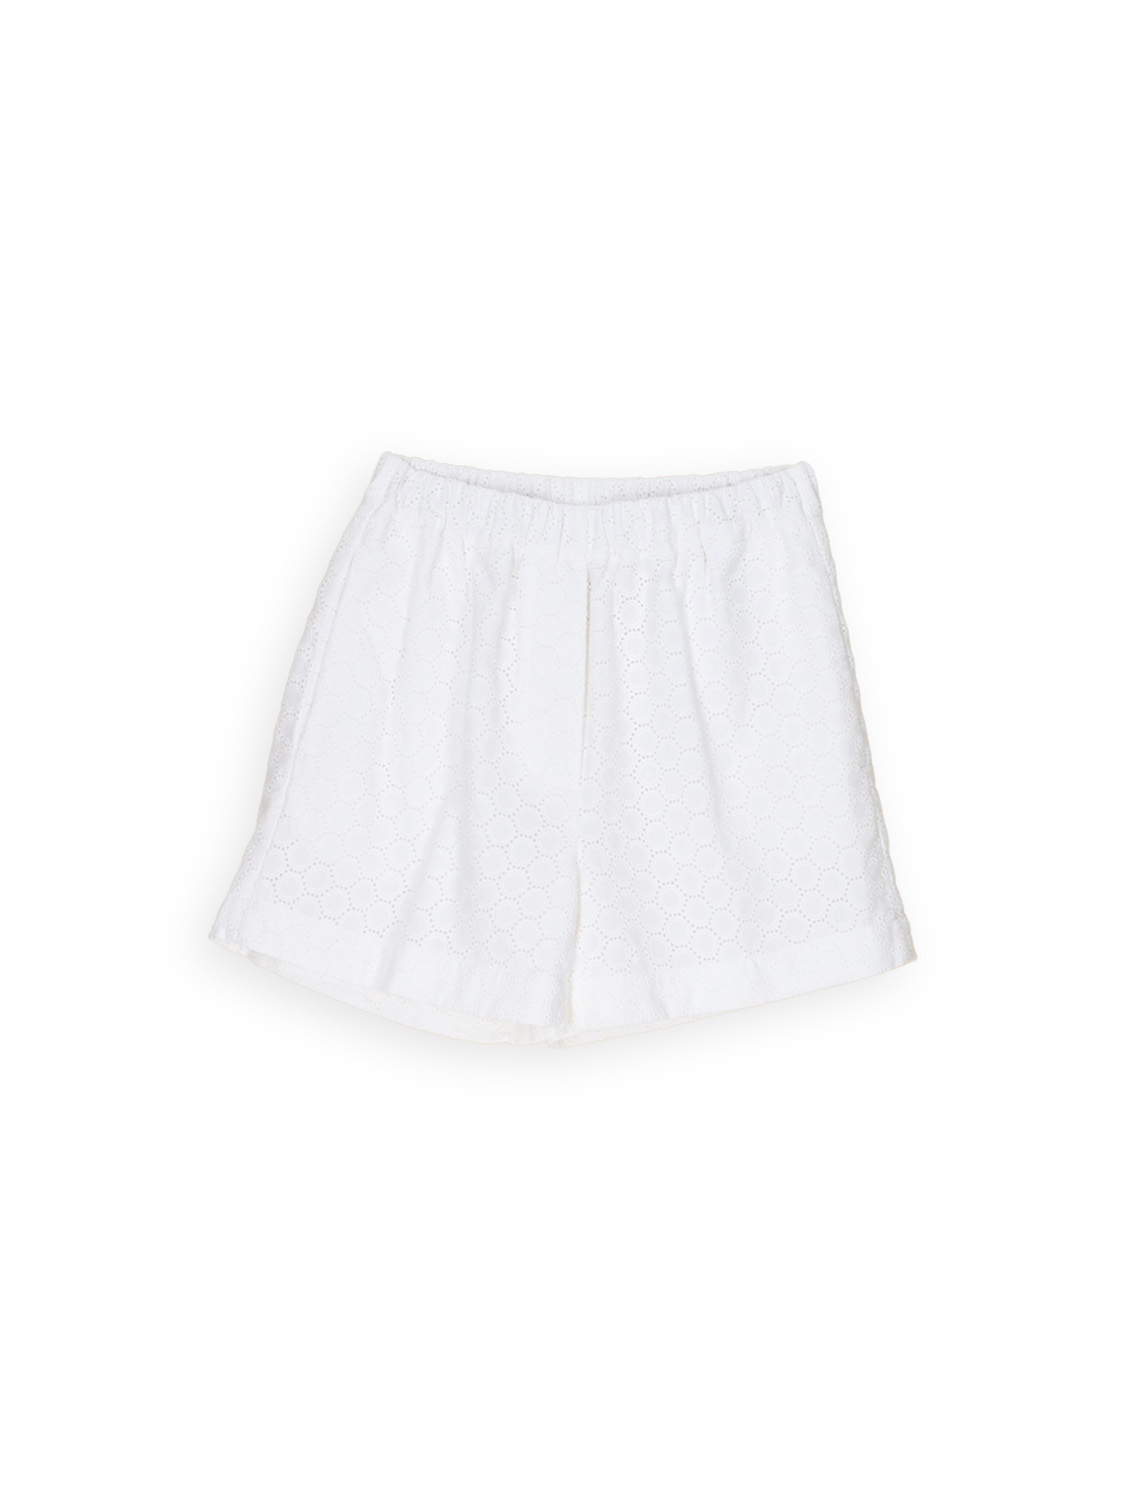 nine in the morning Wanda – Shorts mit Muster  weiß XS/S